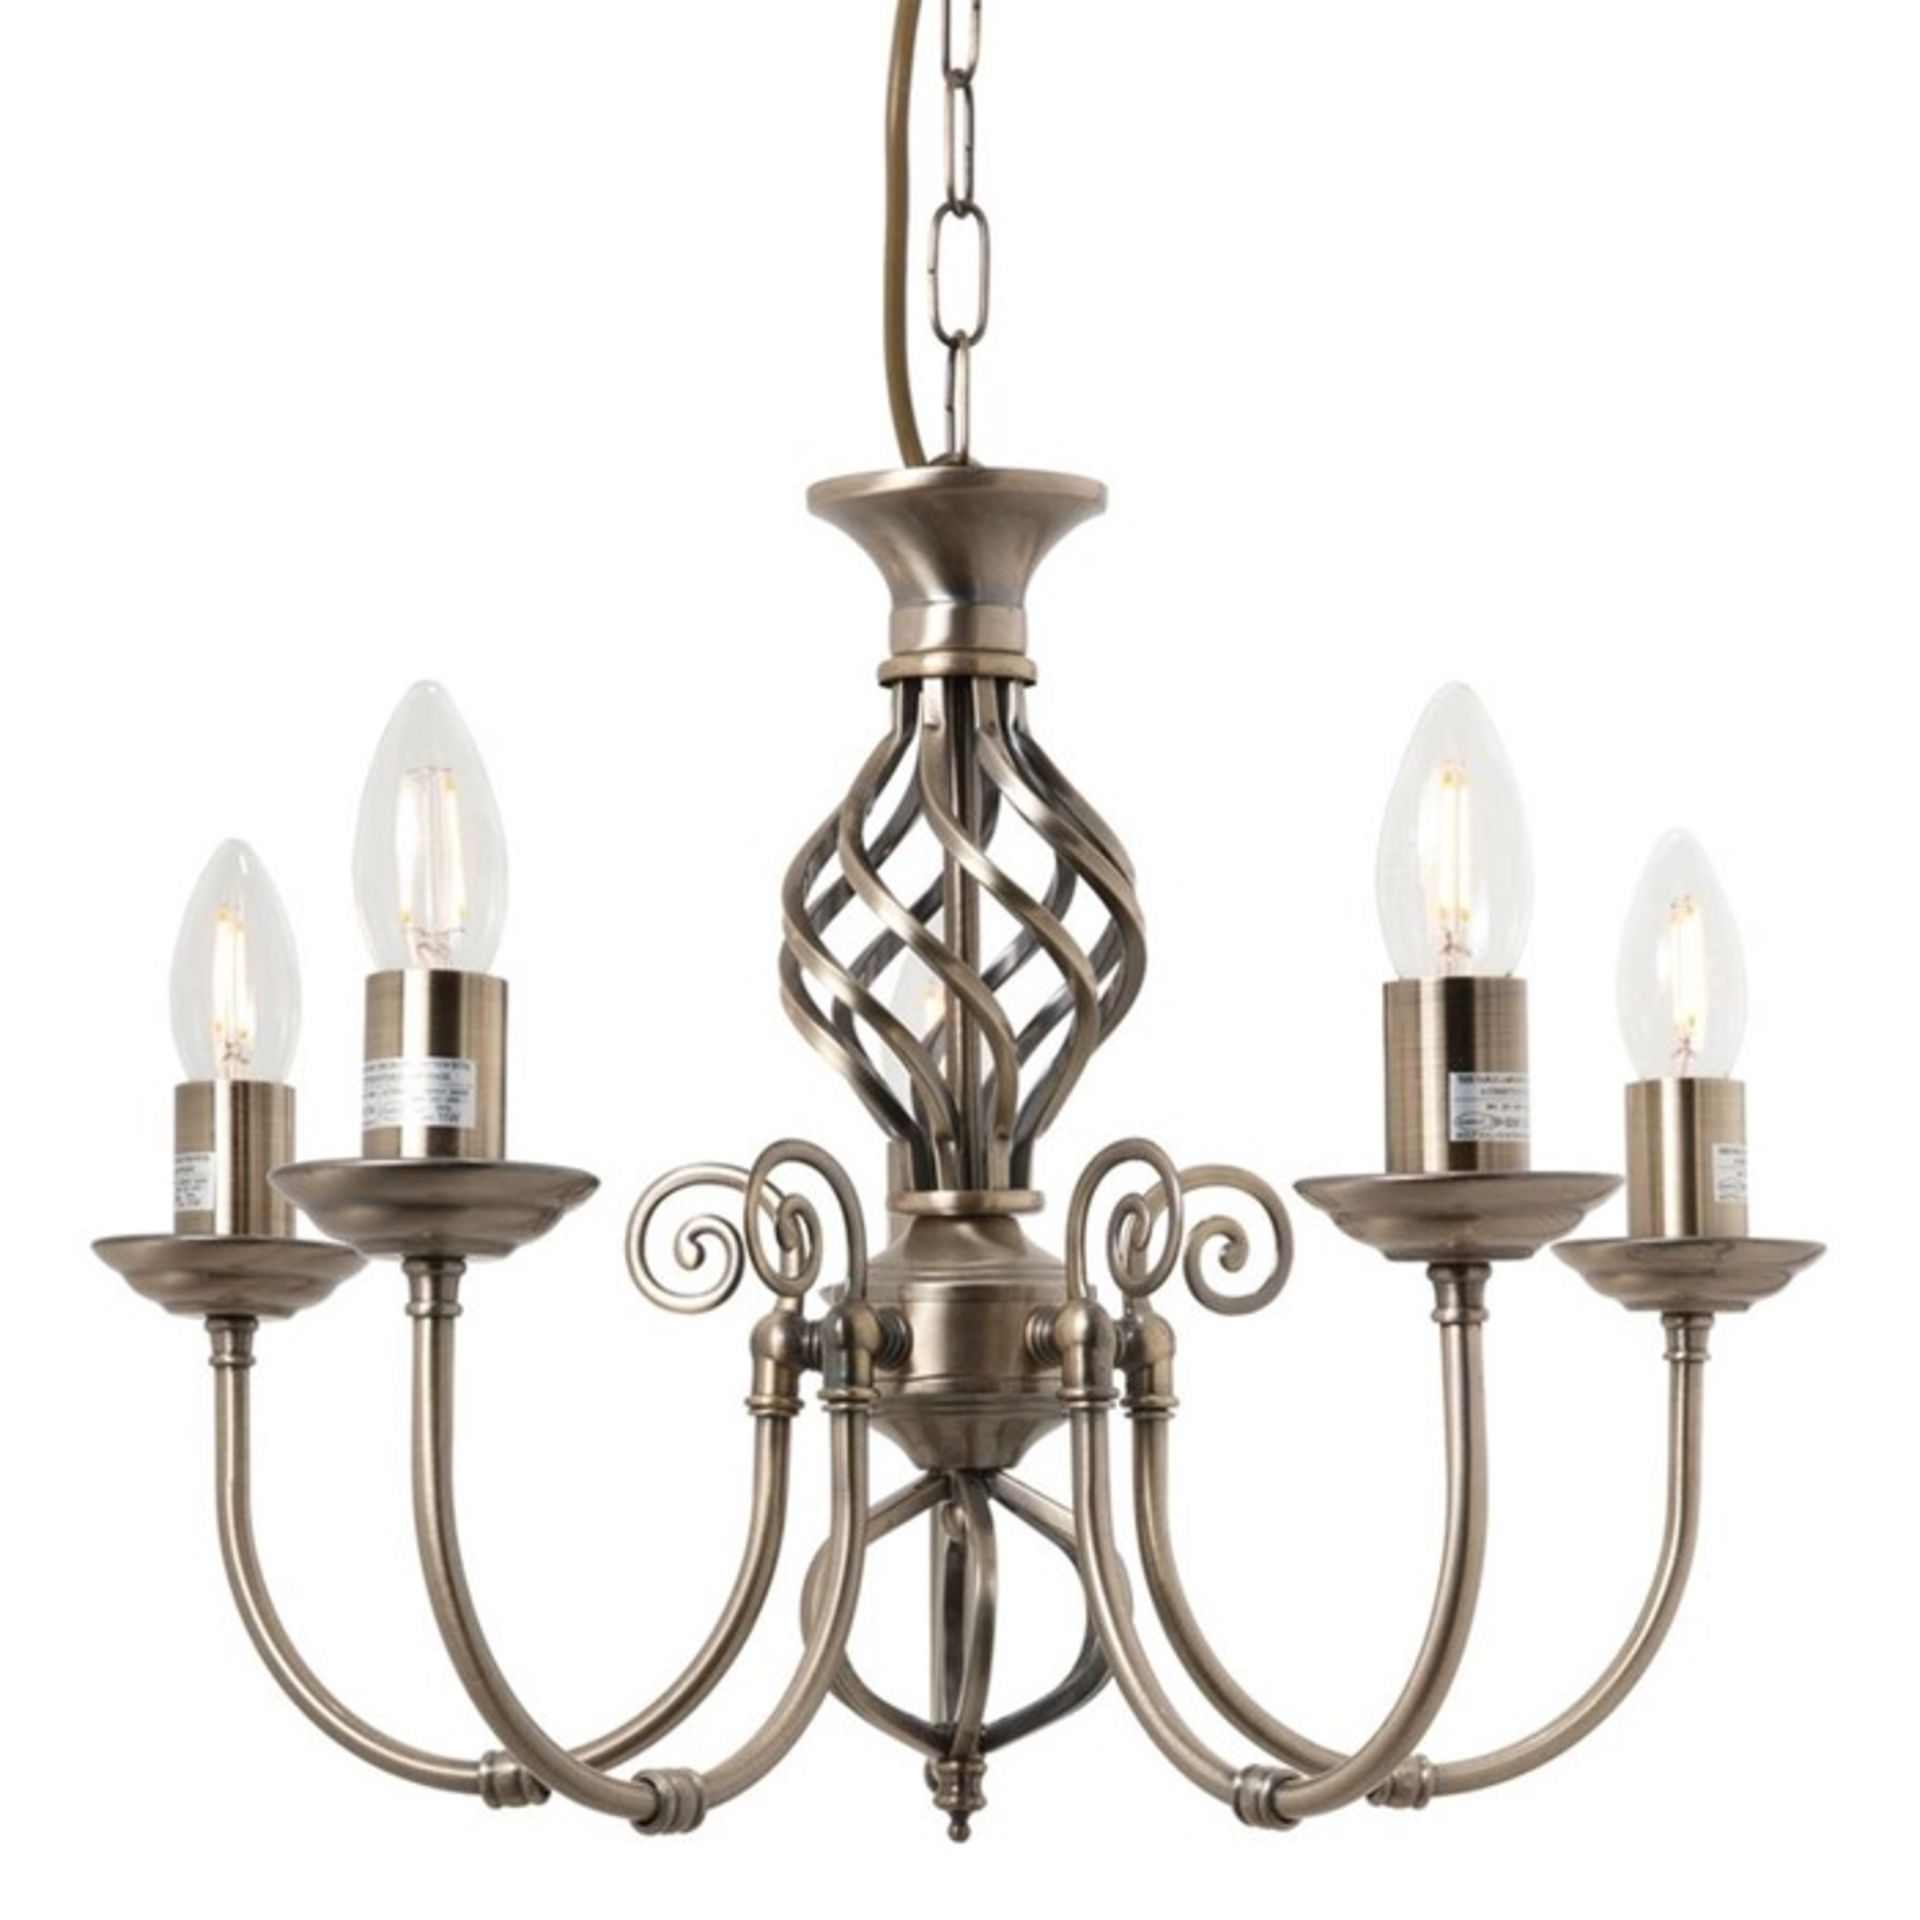 Marlow Home Co., Reynal 5-Light Candle Style Chandelier (CREAM) - RRP £66.99 (HOKG4366 - 12602/6)